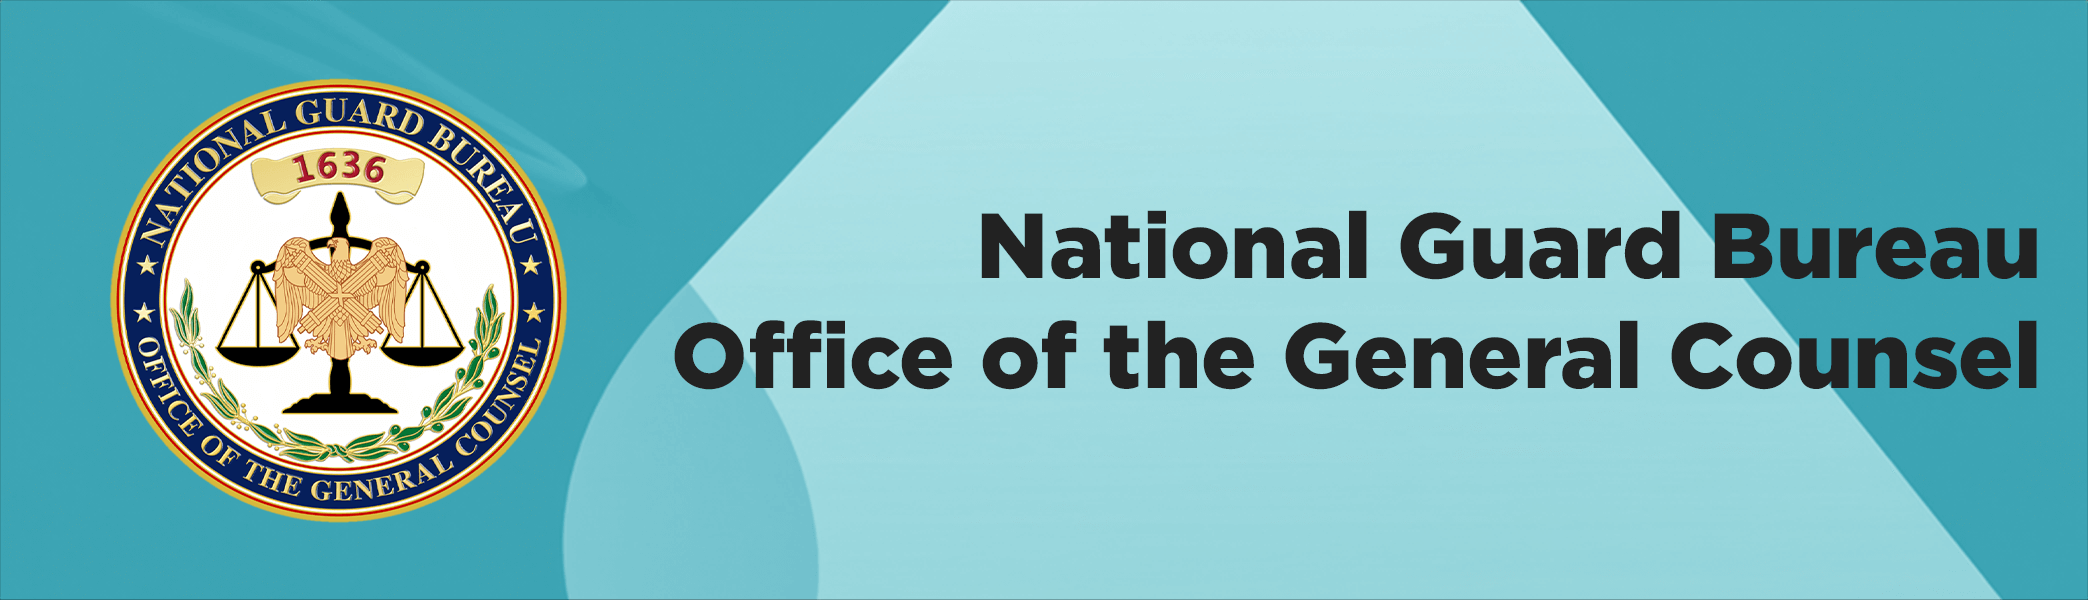 NGB Office of the General Counsel